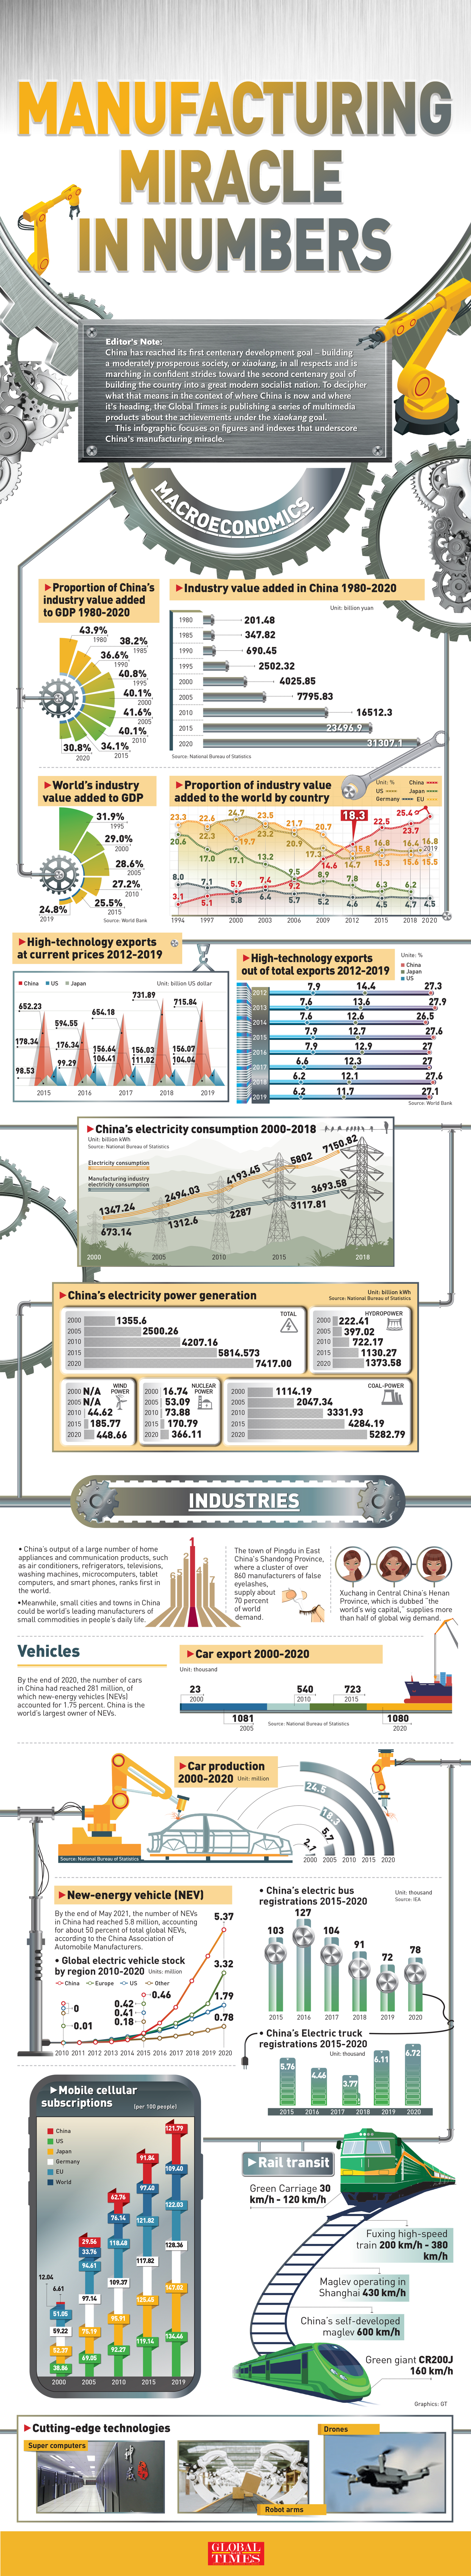 China's manufacturing miracle in numbers Infographic: GT